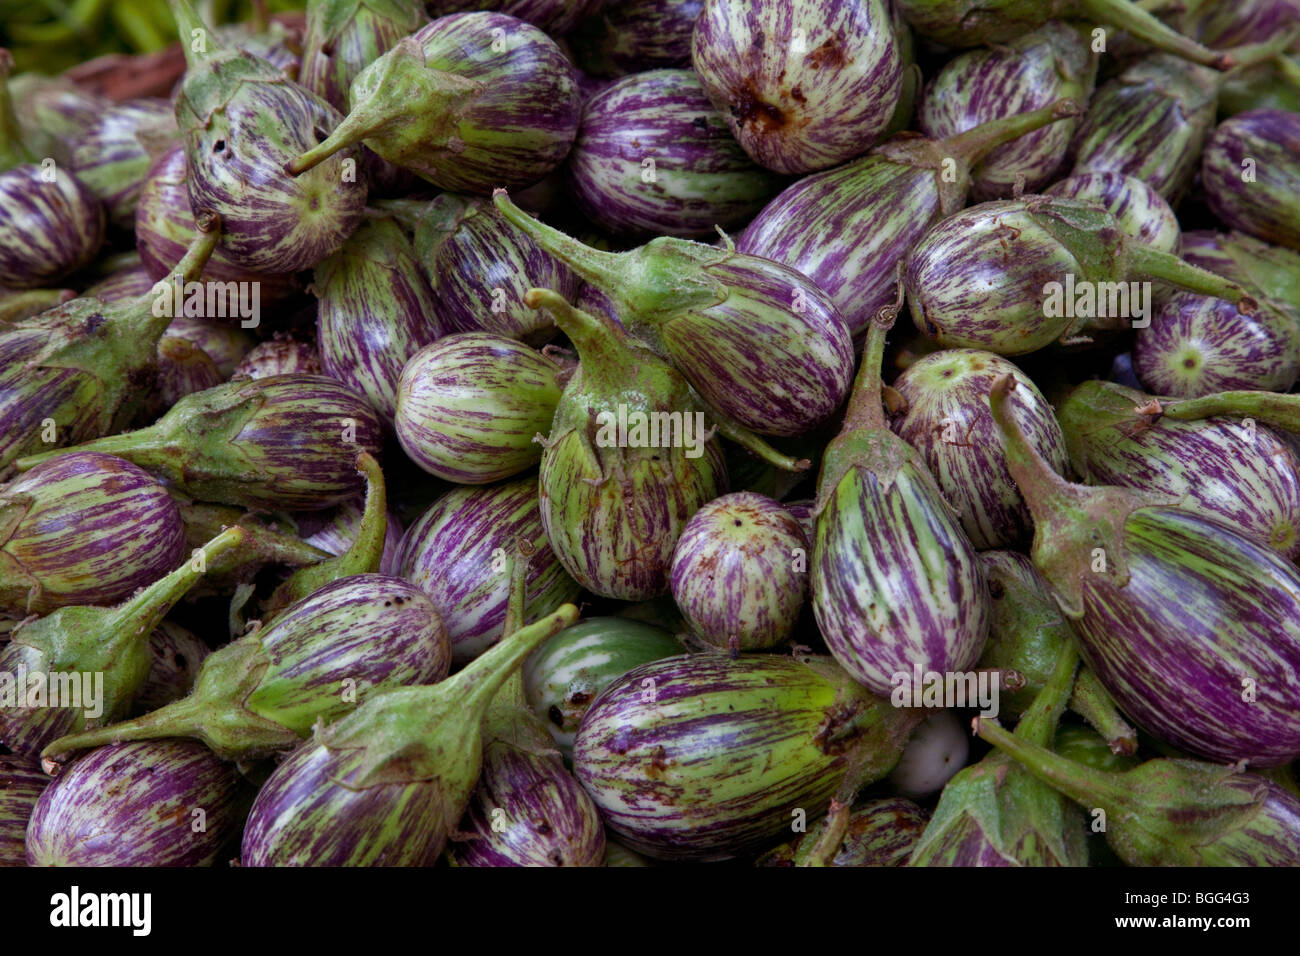 Aubergines Also Known As Eggplants Begun Or Brinjal Stock Photo Alamy